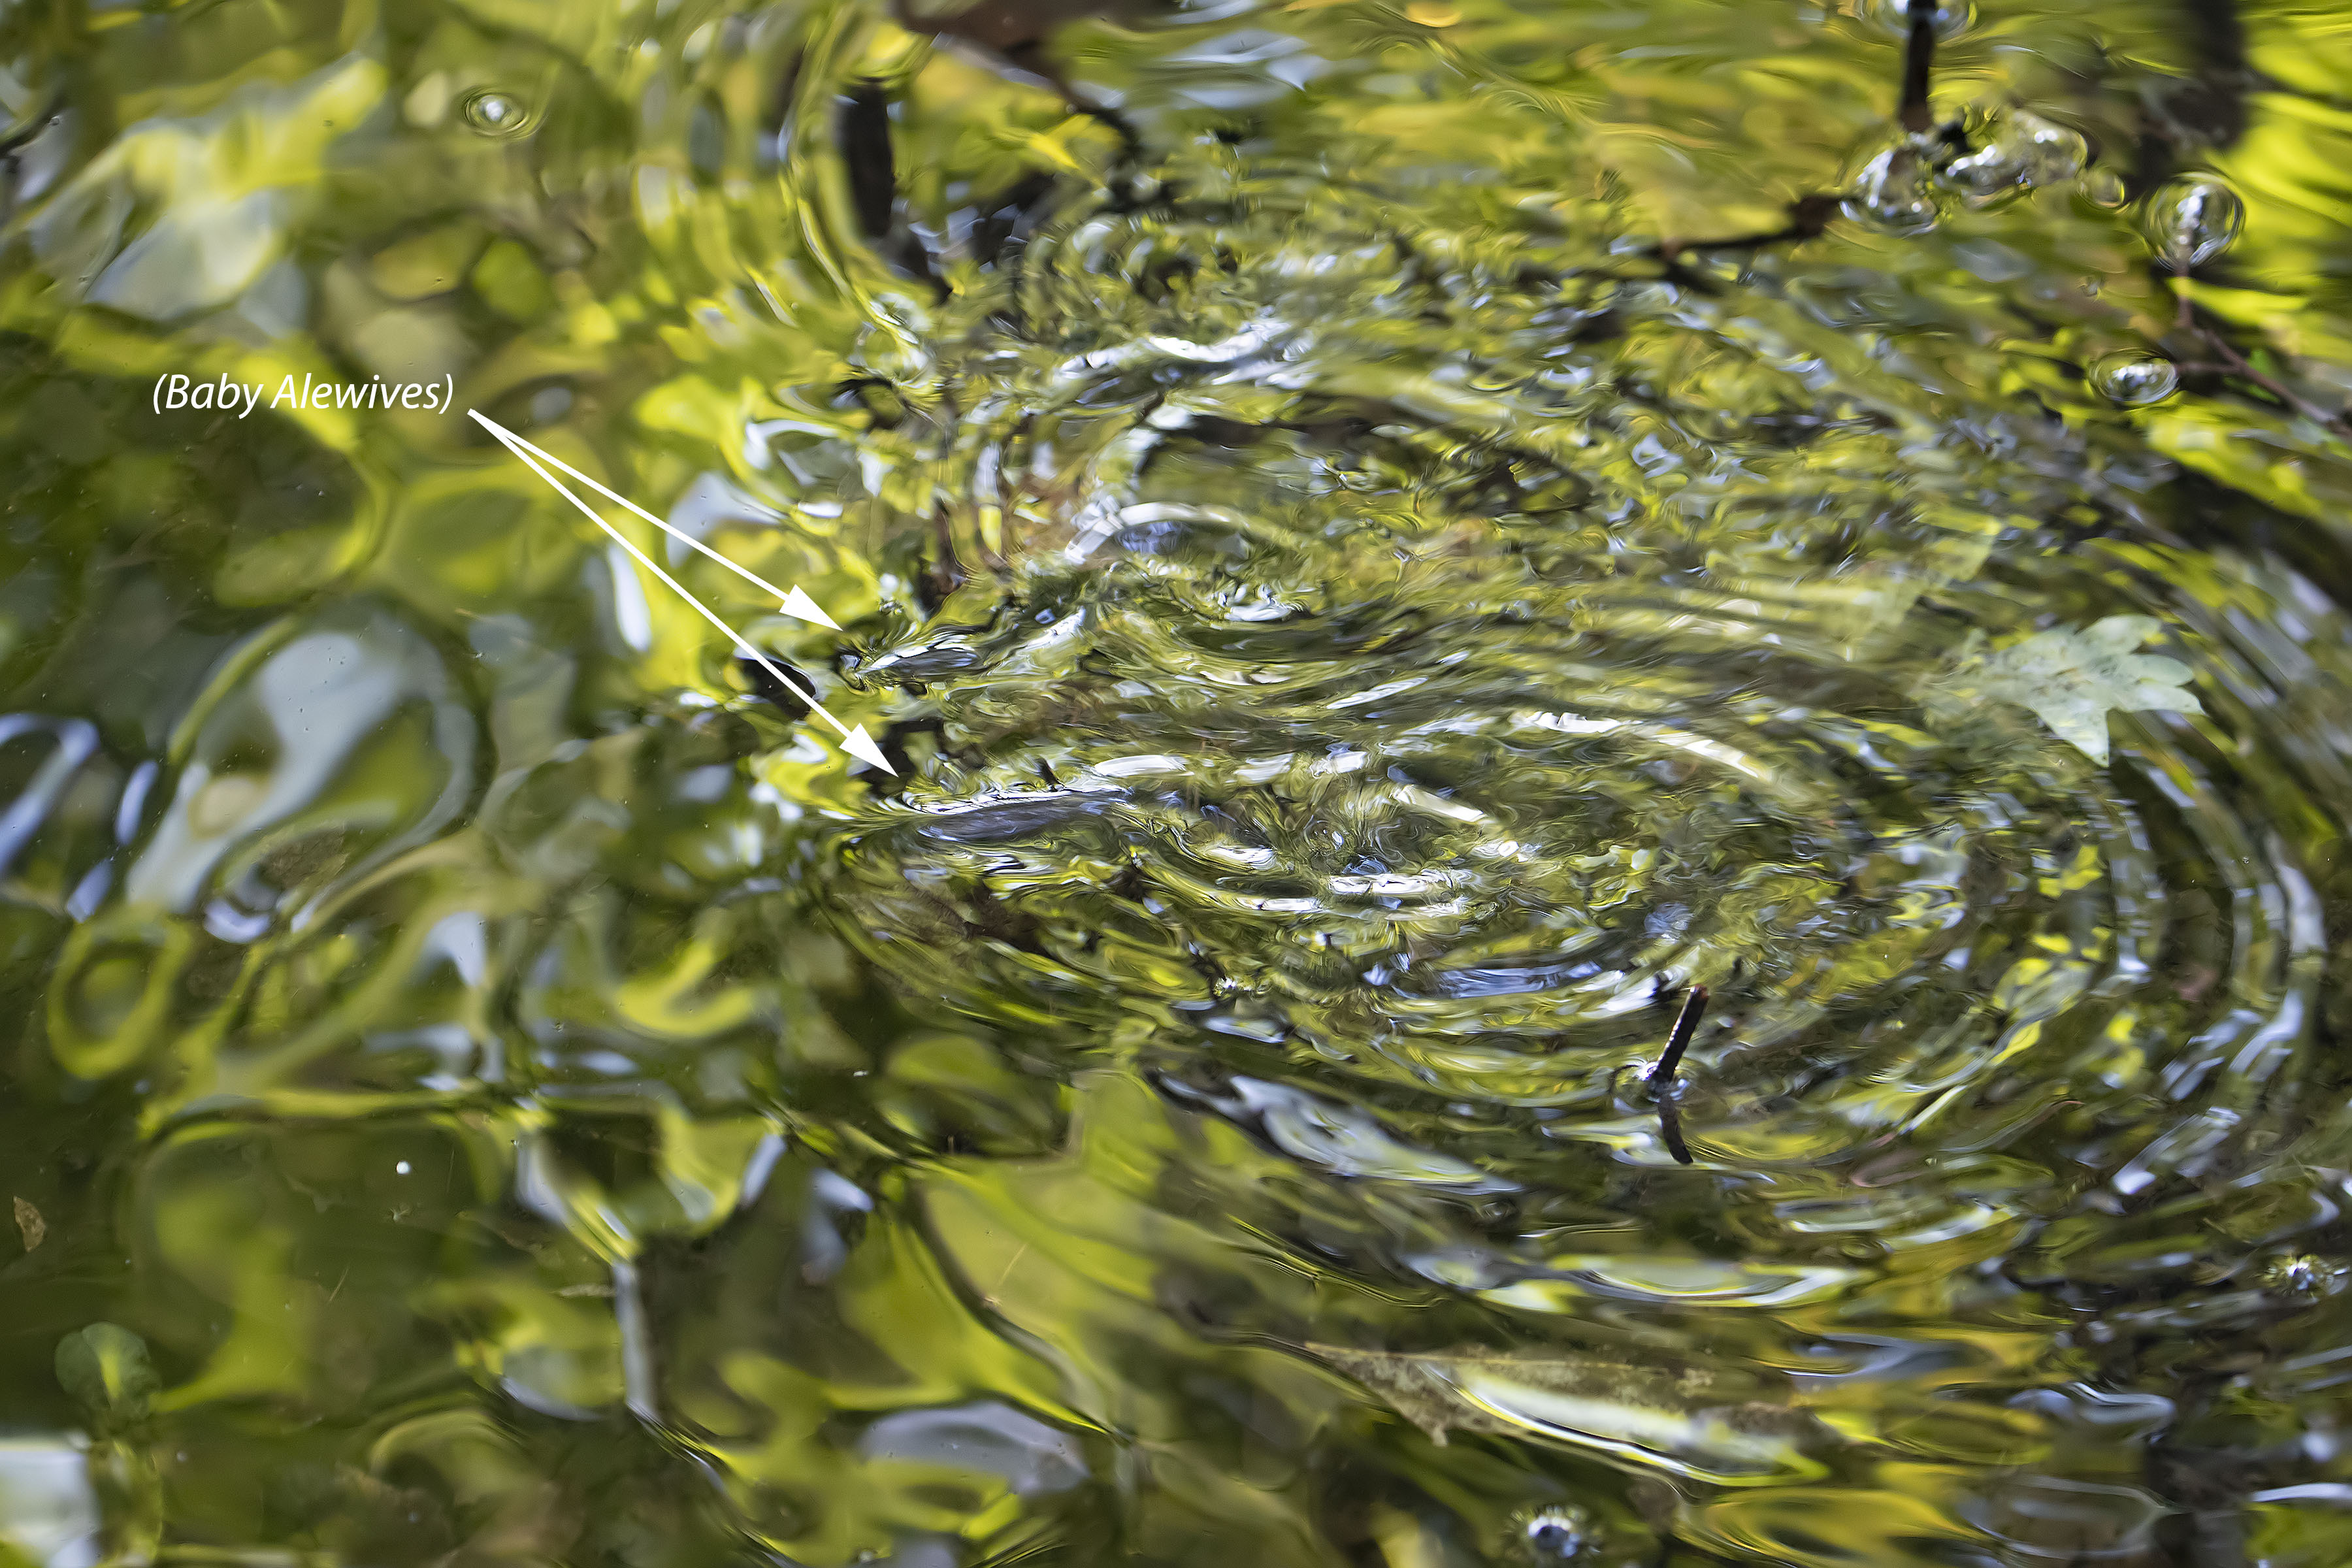 Young-of-the-year alewives staging in Ligonnee Creek last week as they pushed toward tidal waters from Long Pond.